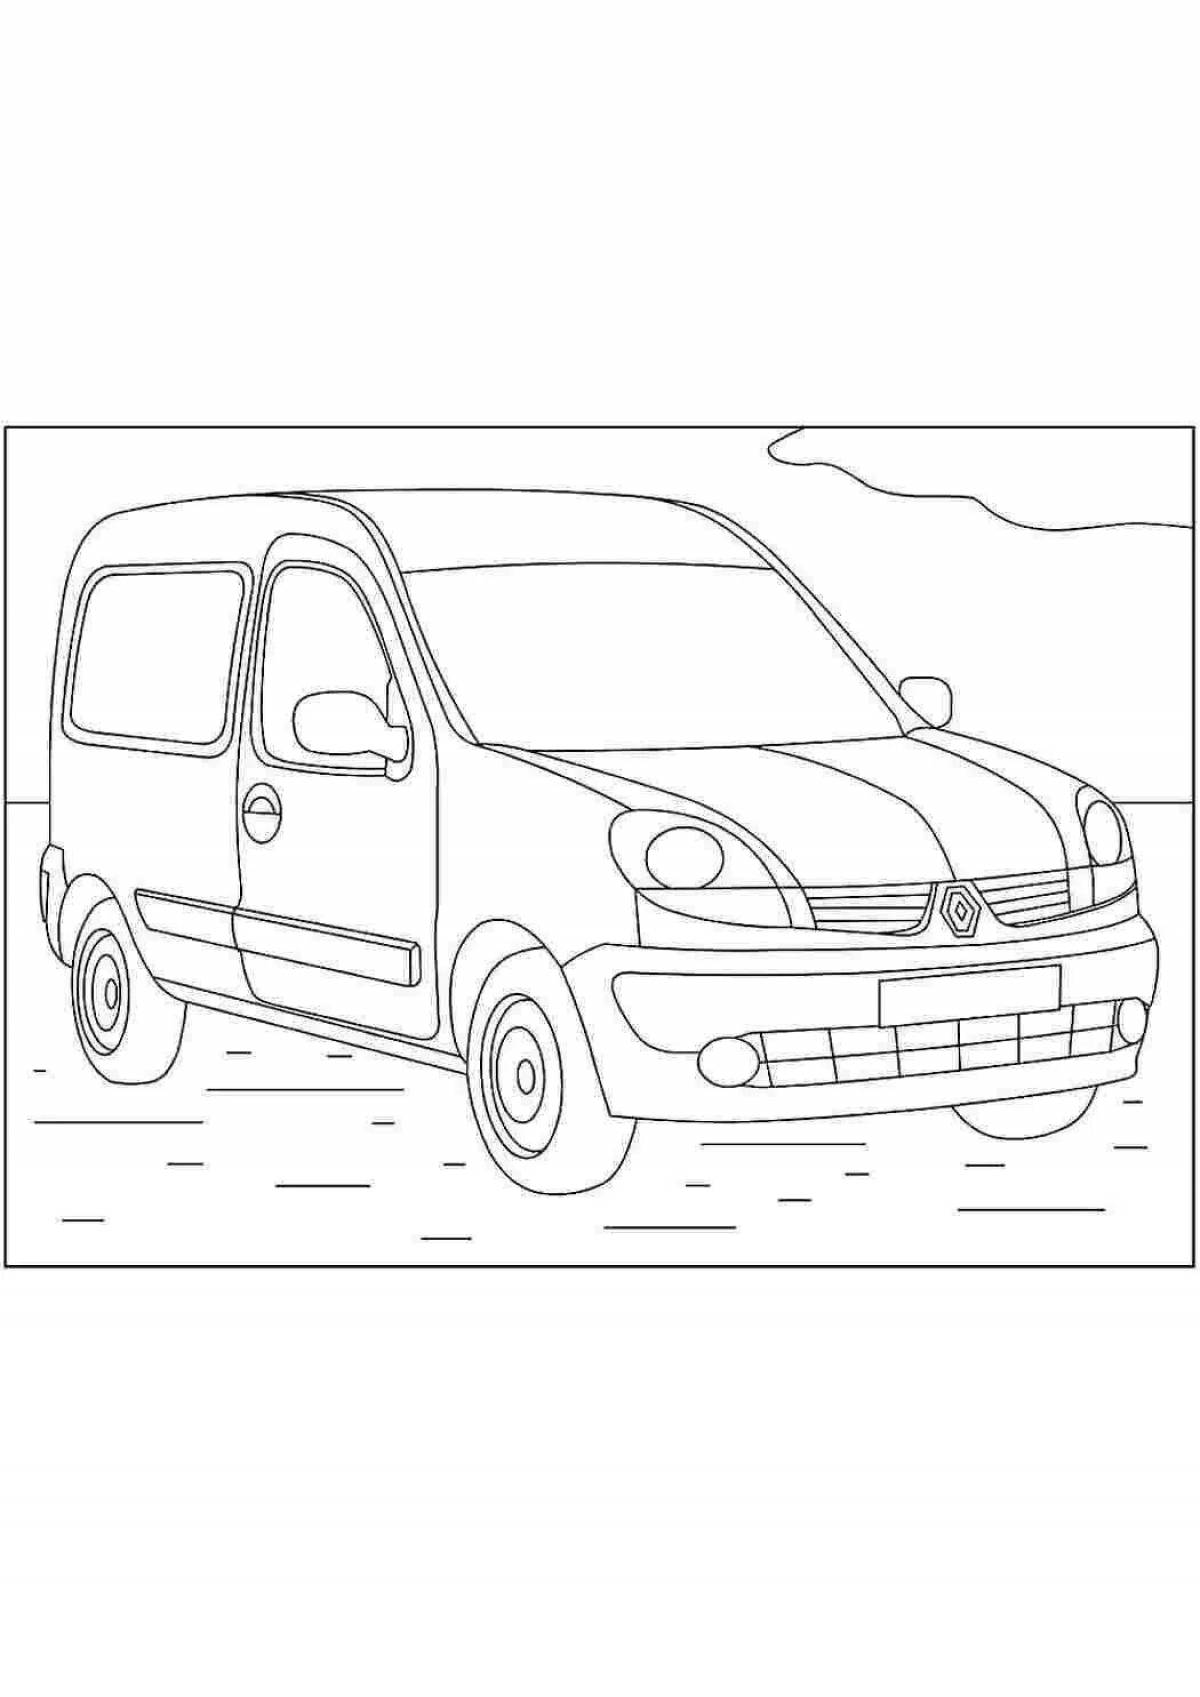 Coloring page amazing renault car